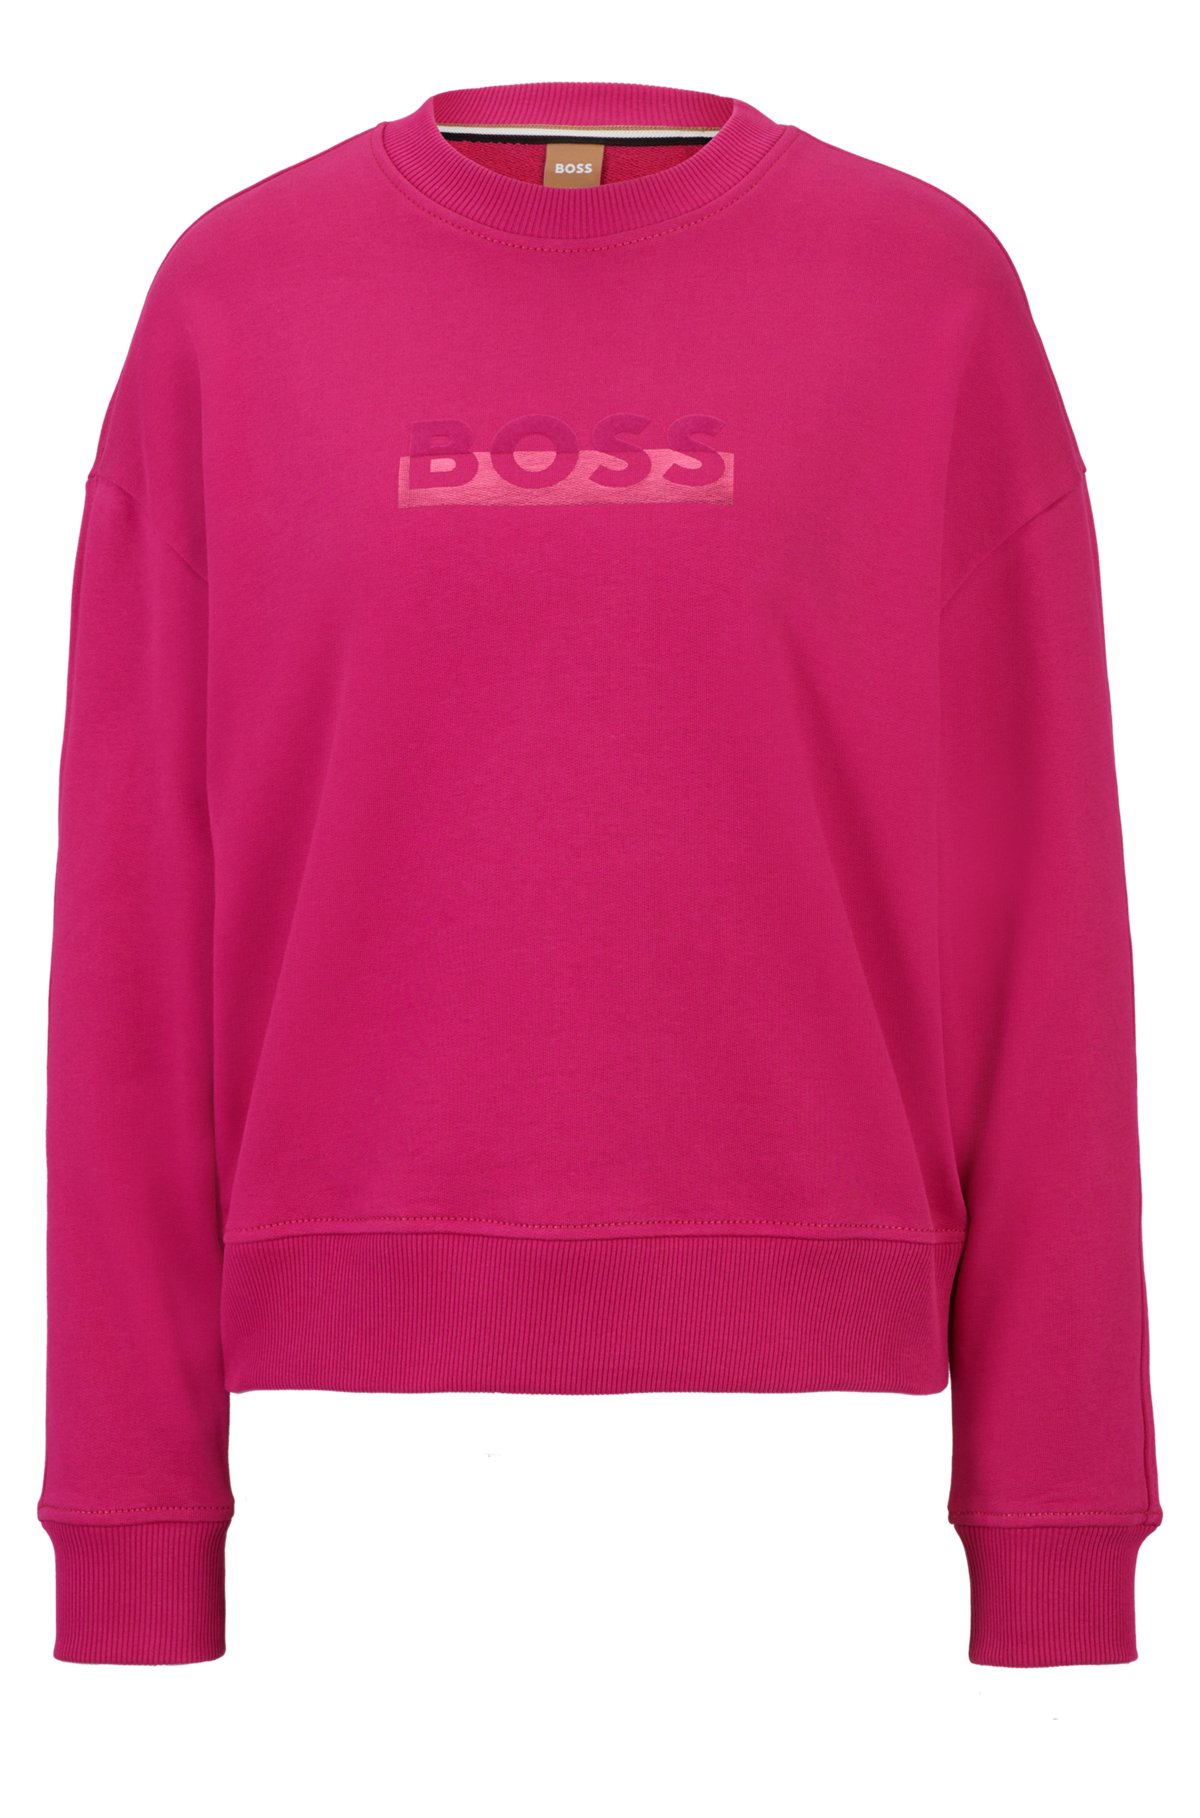 Relaxed-fit cotton-blend sweatshirt with logo detail, Pink